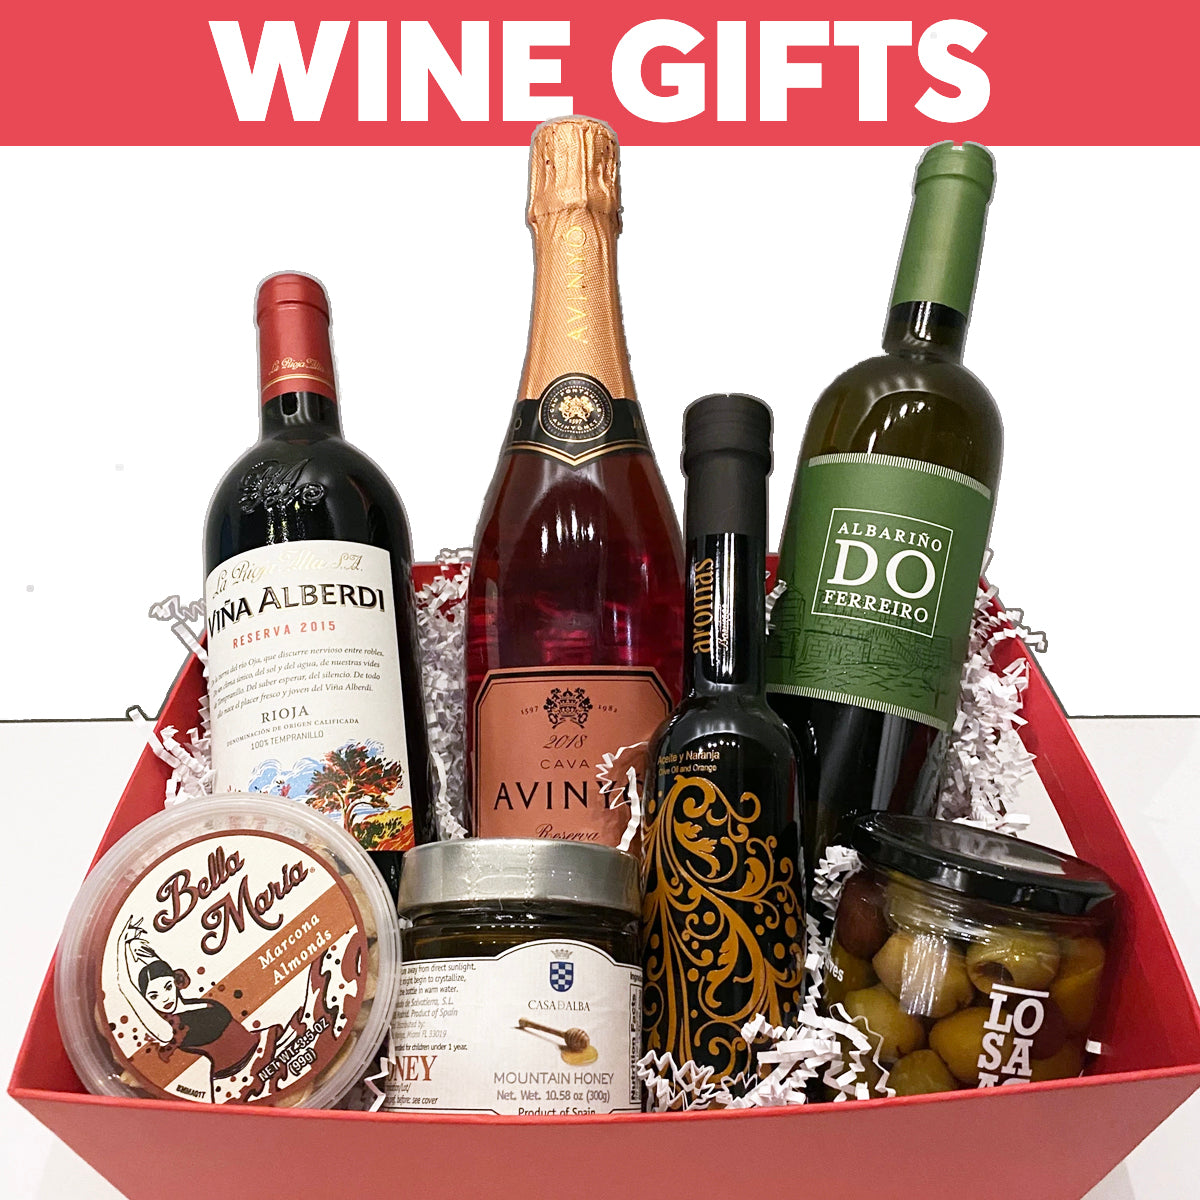 Wine Gifts, gift baskets, preselected wines, wine and food gifts